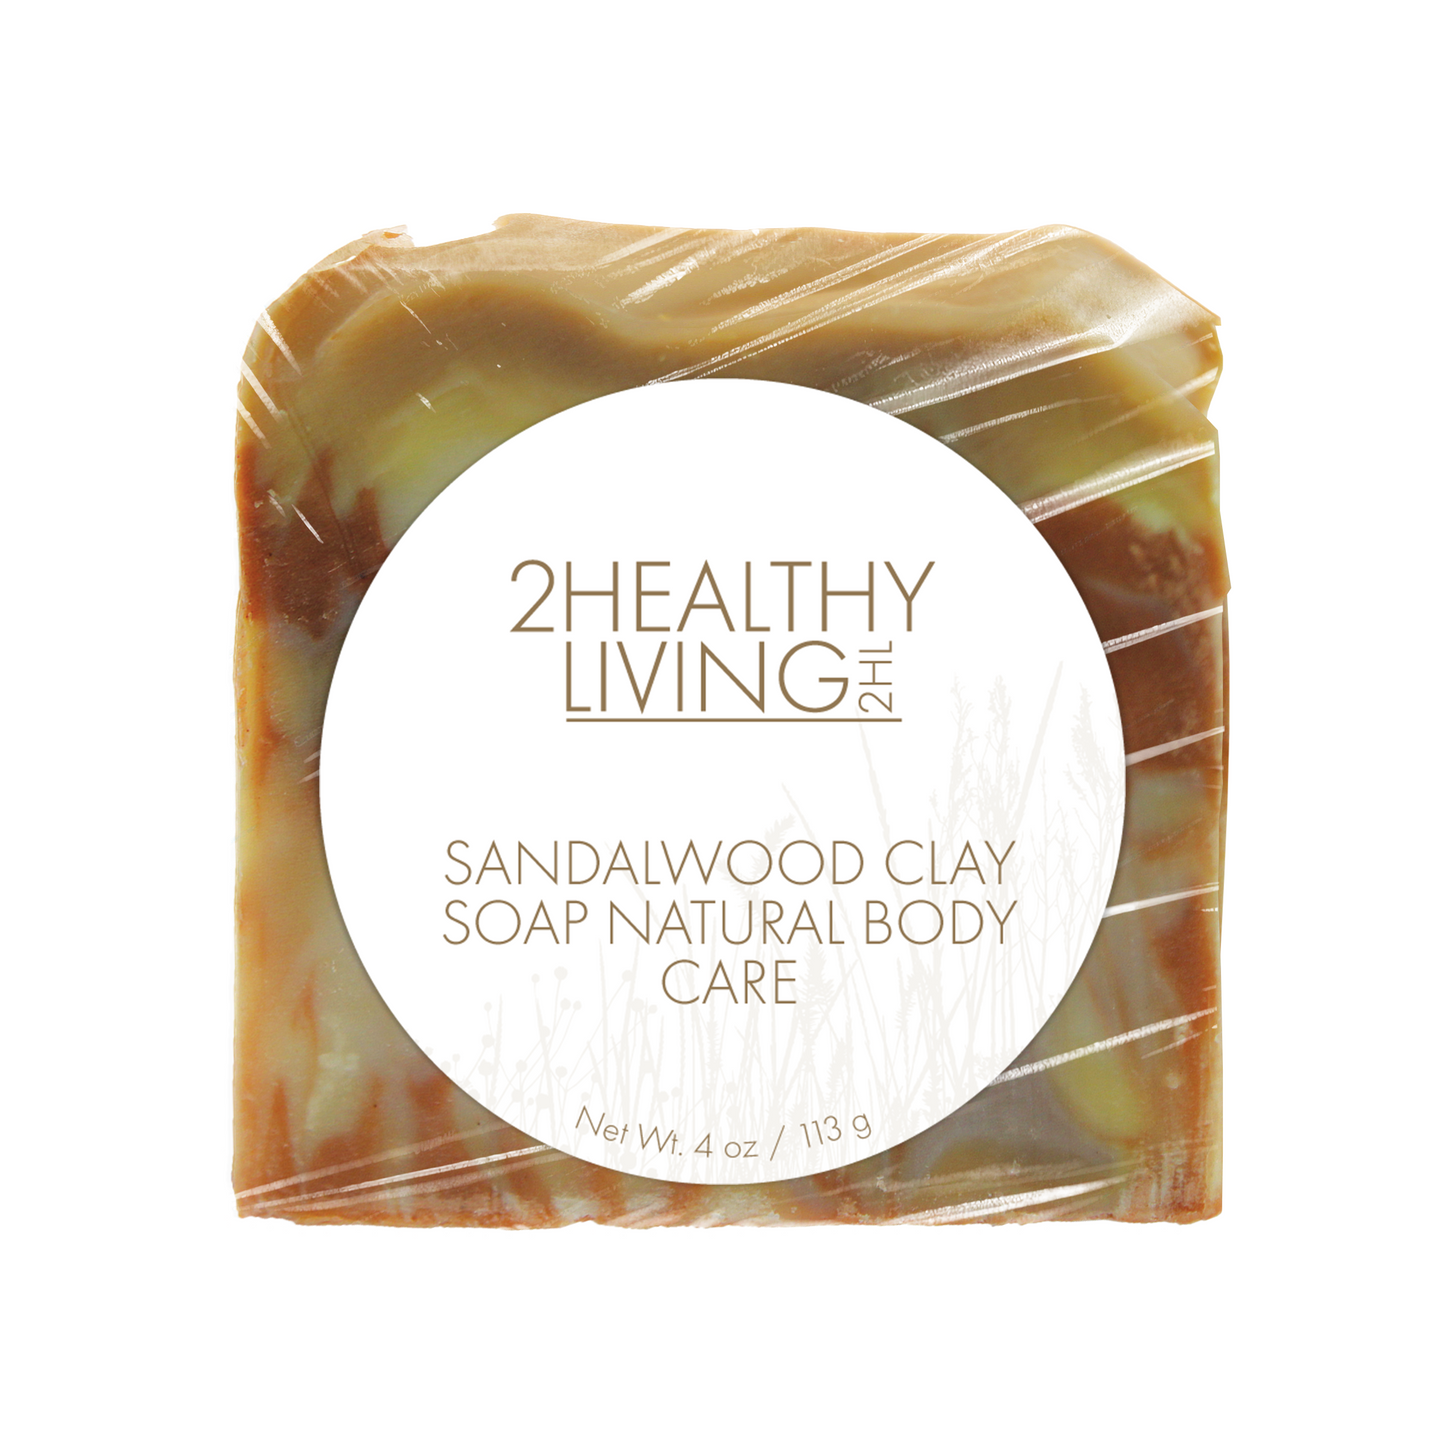 Sandalwood Clay Soap Natural Body Care